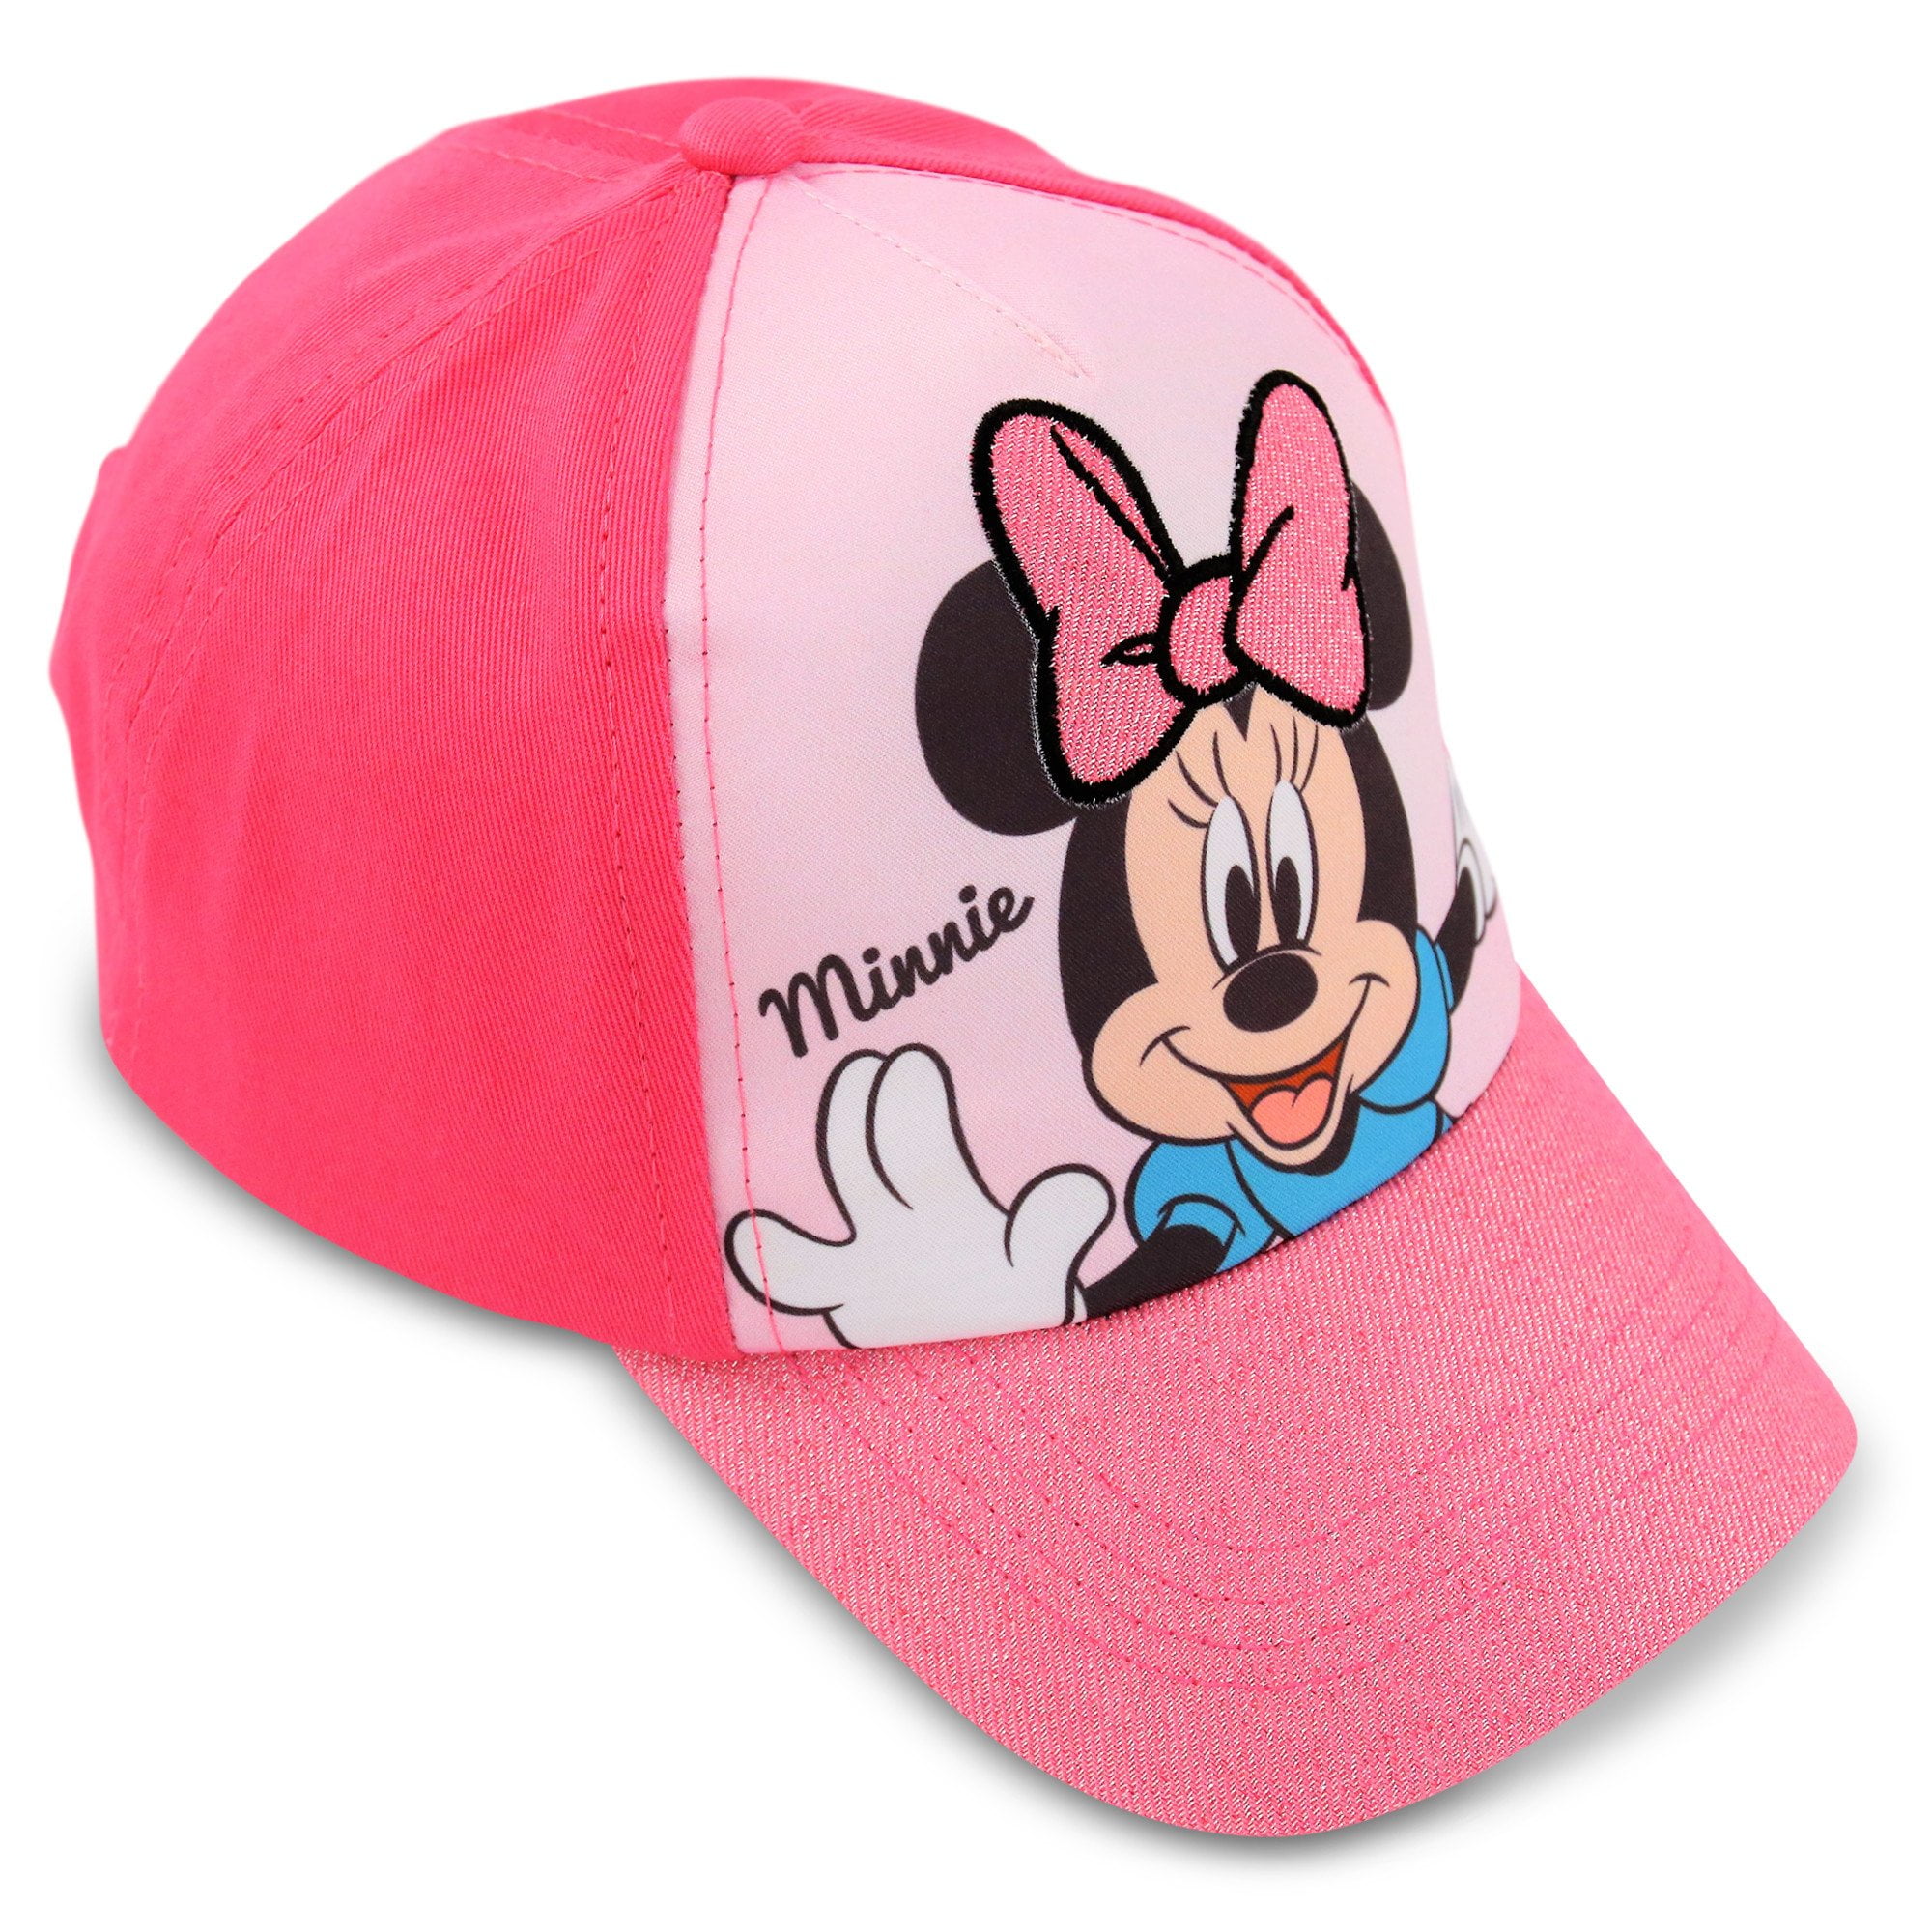 Disney Little Girls Minnie Mouse Cotton Baseball Cap Age 2-4 or 4-7 